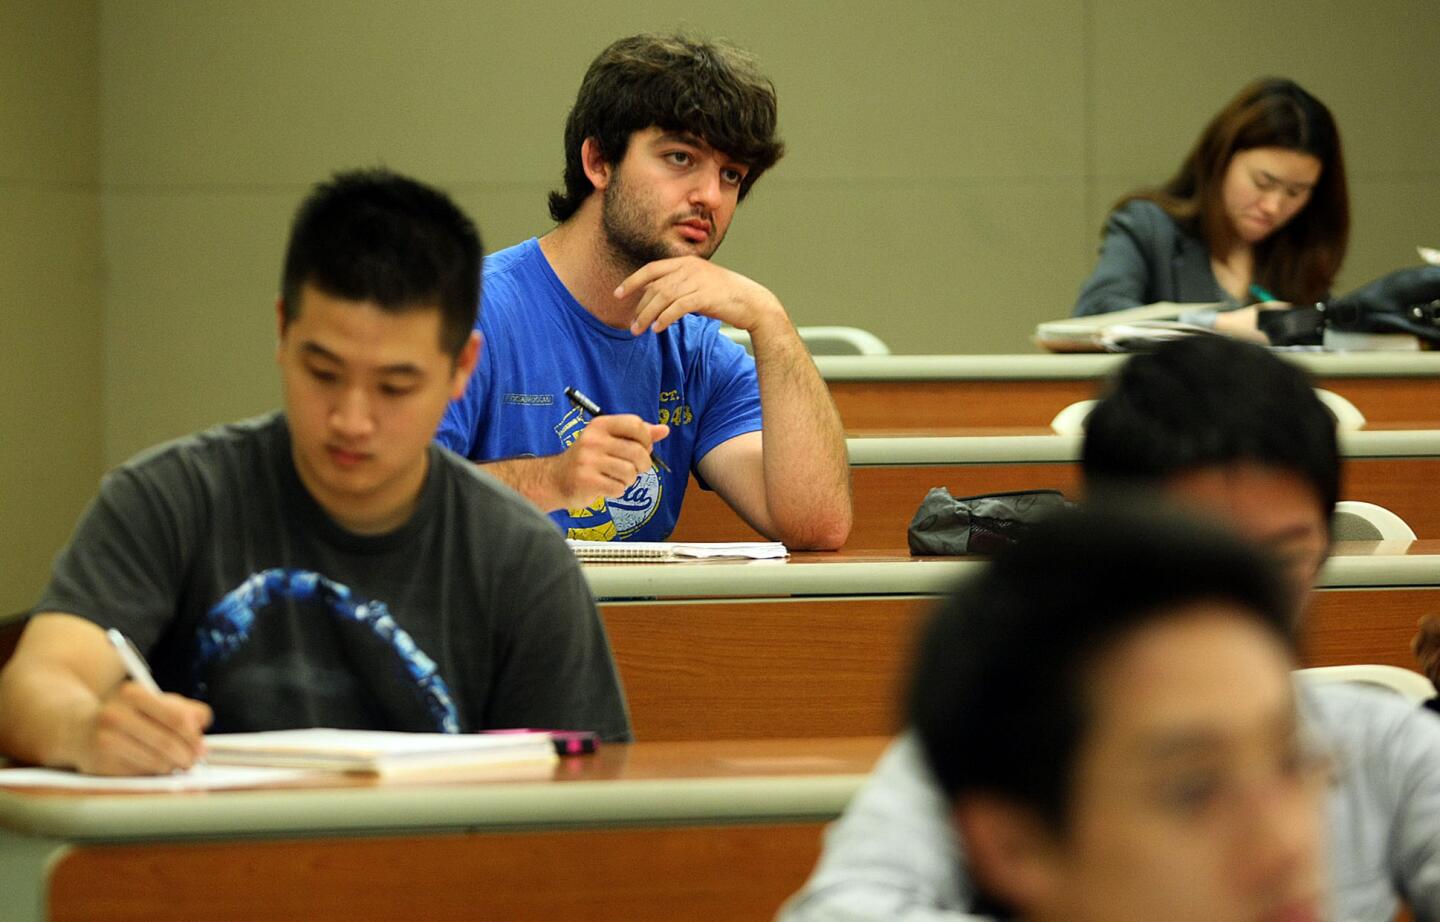 Philip Caltabiano listens to the instructor in a UCLA physics class. He studied marine biology and conservation biology and hopes to get a field research position after graduating next month. He has also applied to be a teaching assistant at UCLA. He has $14,500 left in student debt; he has already paid back $7,000.